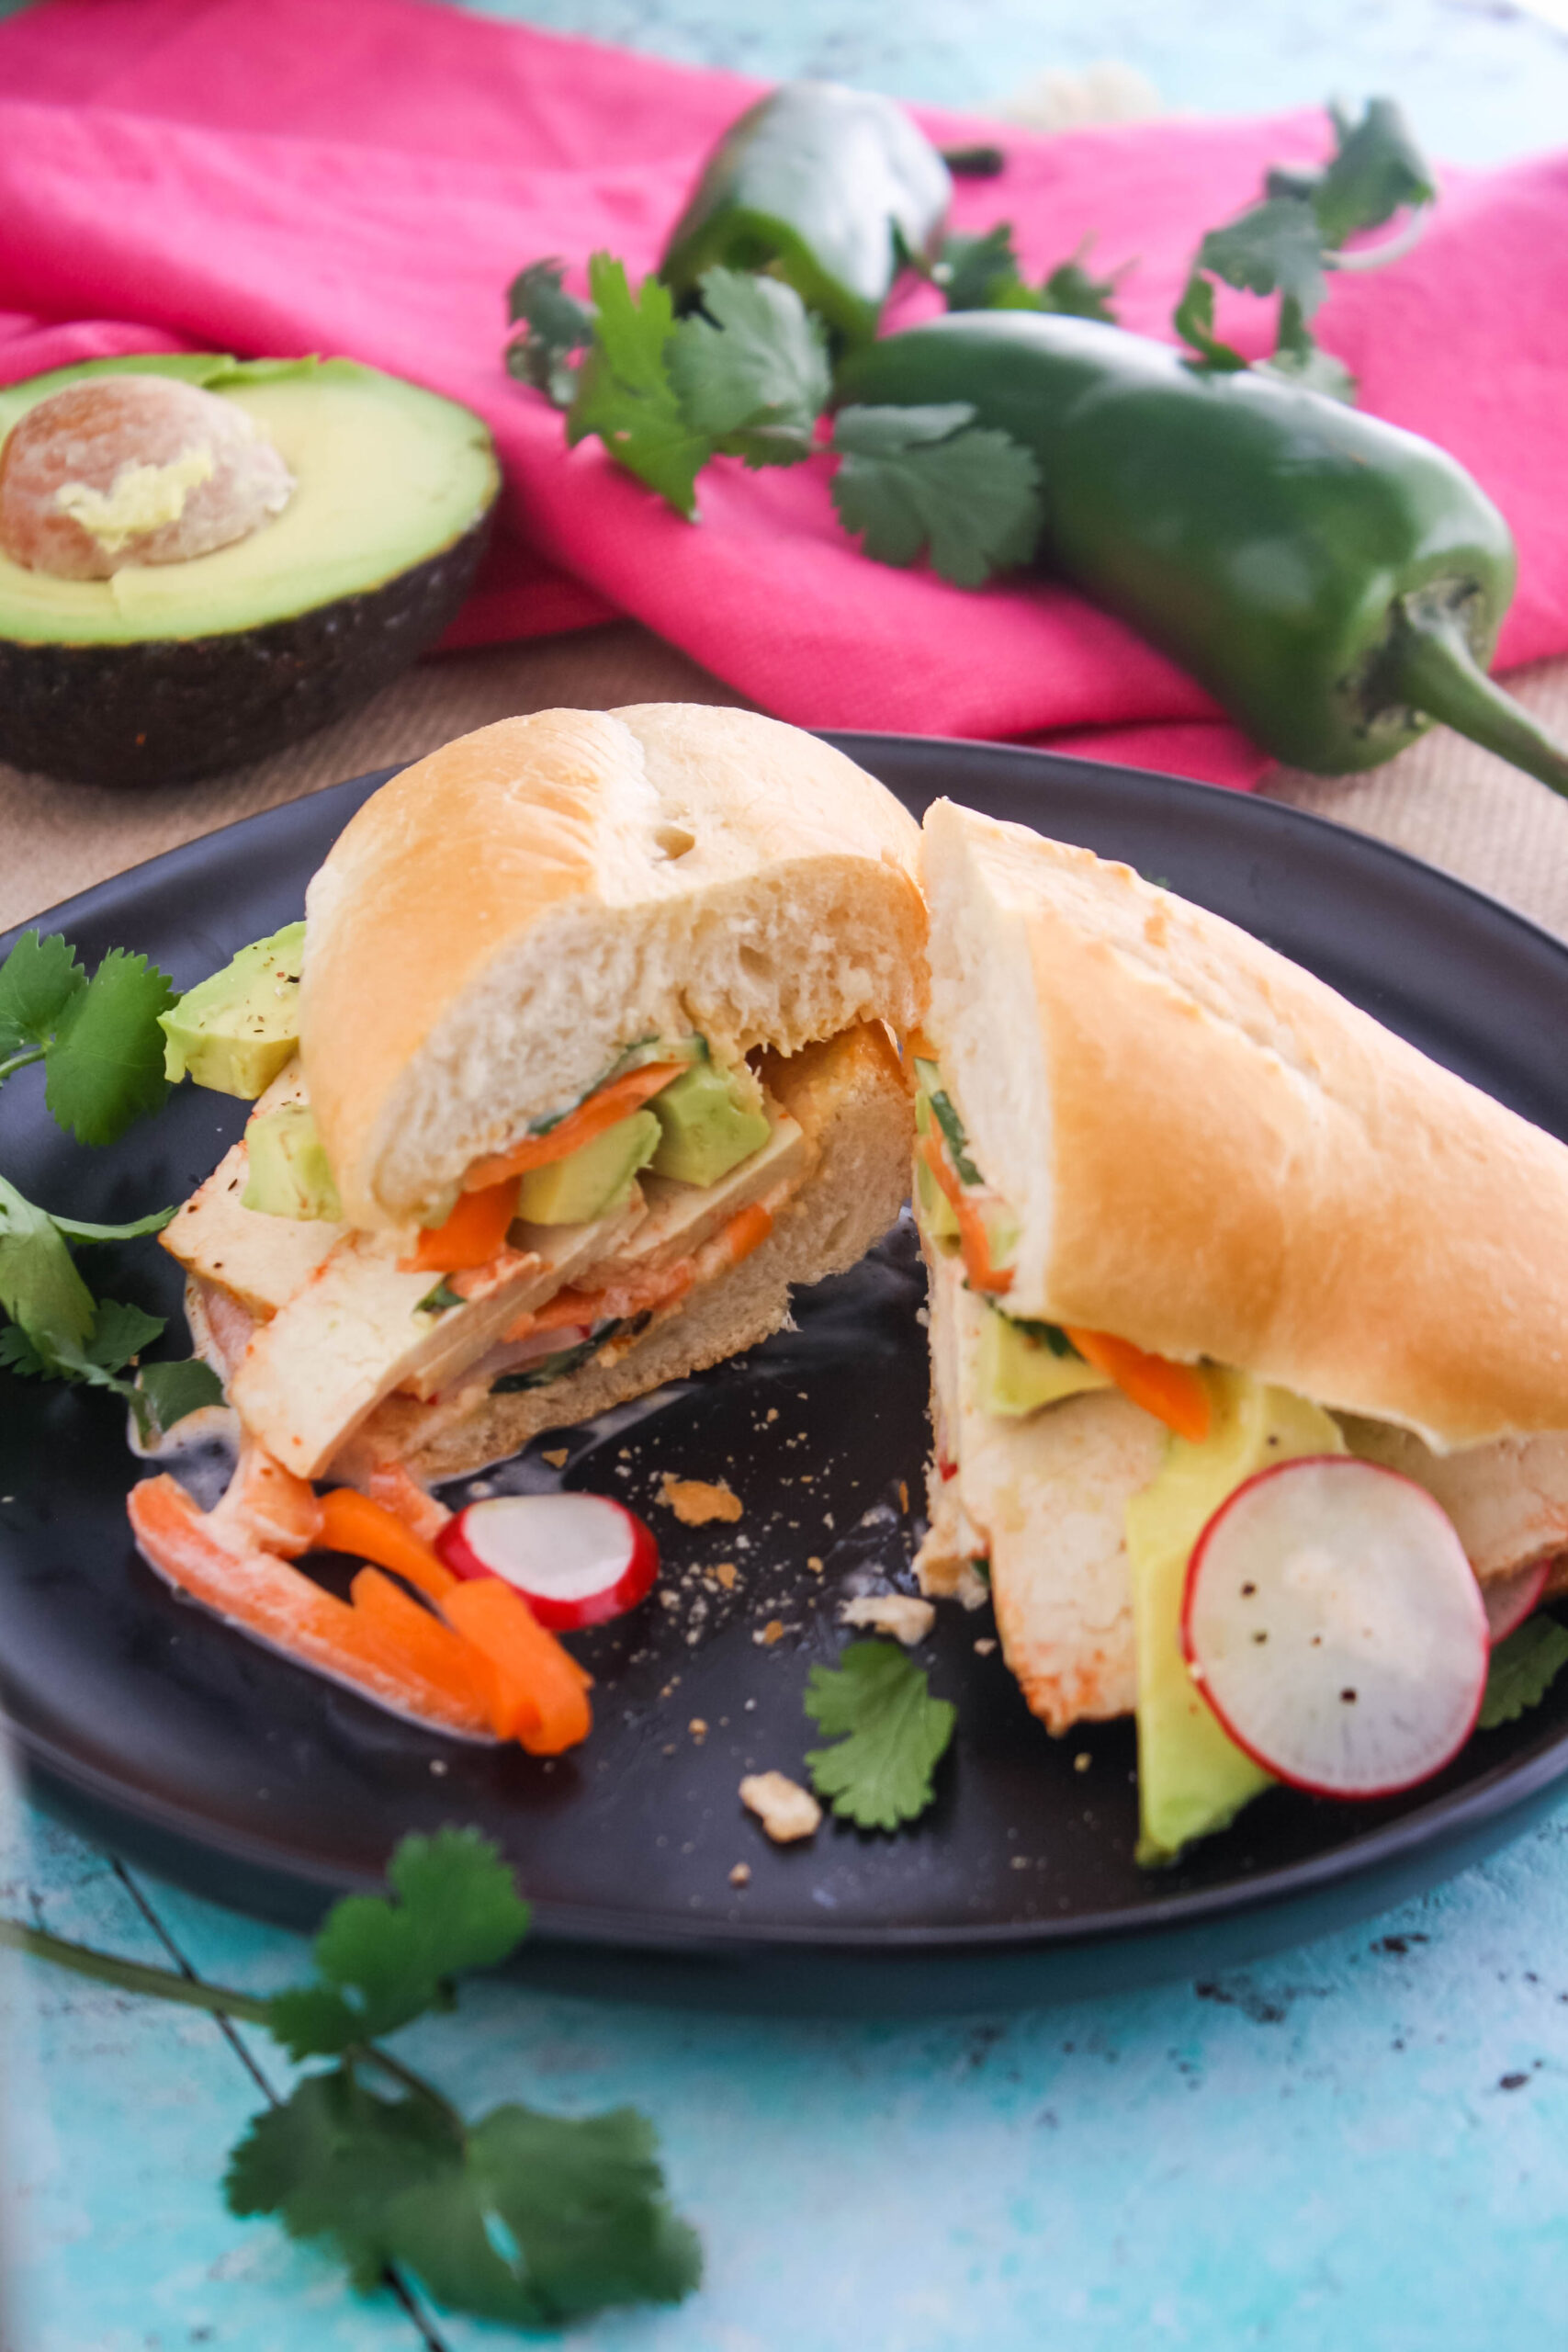 Spicy Tofu Banh Mi Sandwiches are filled with a variety of delightful veggies!